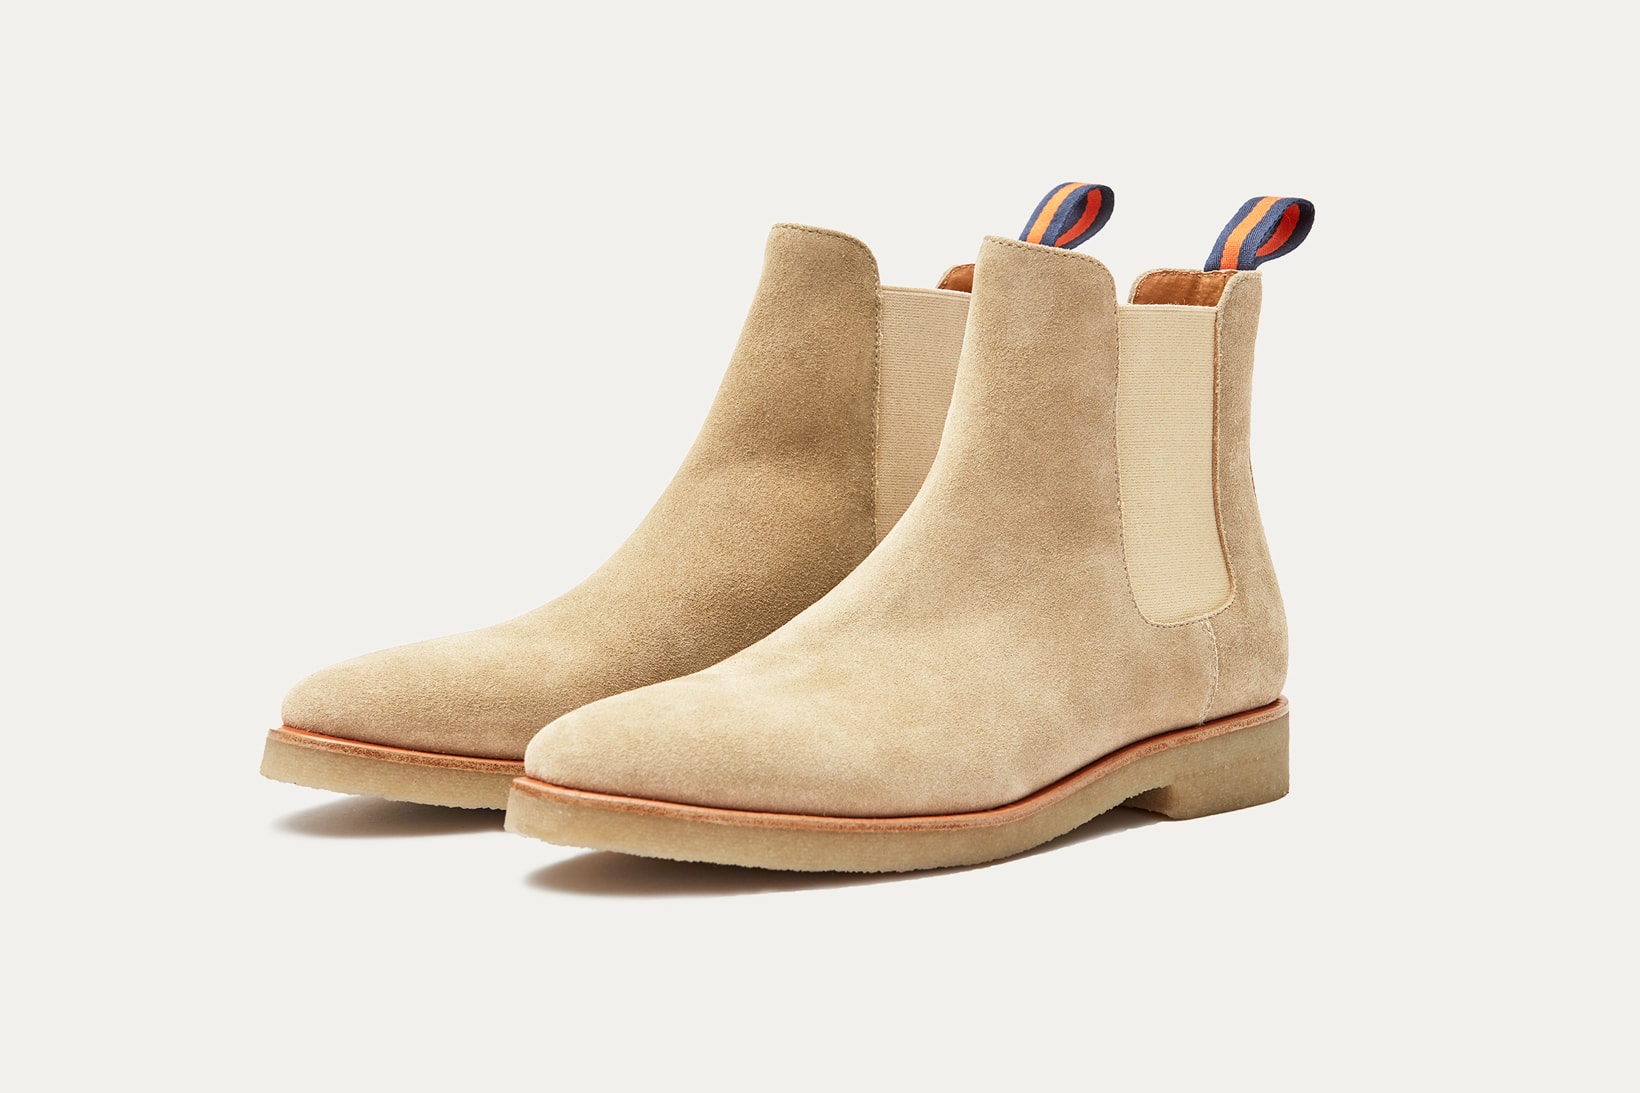 New Republic by Mark McNairy Holiday 2017 Collection chelsea boot fur slipper